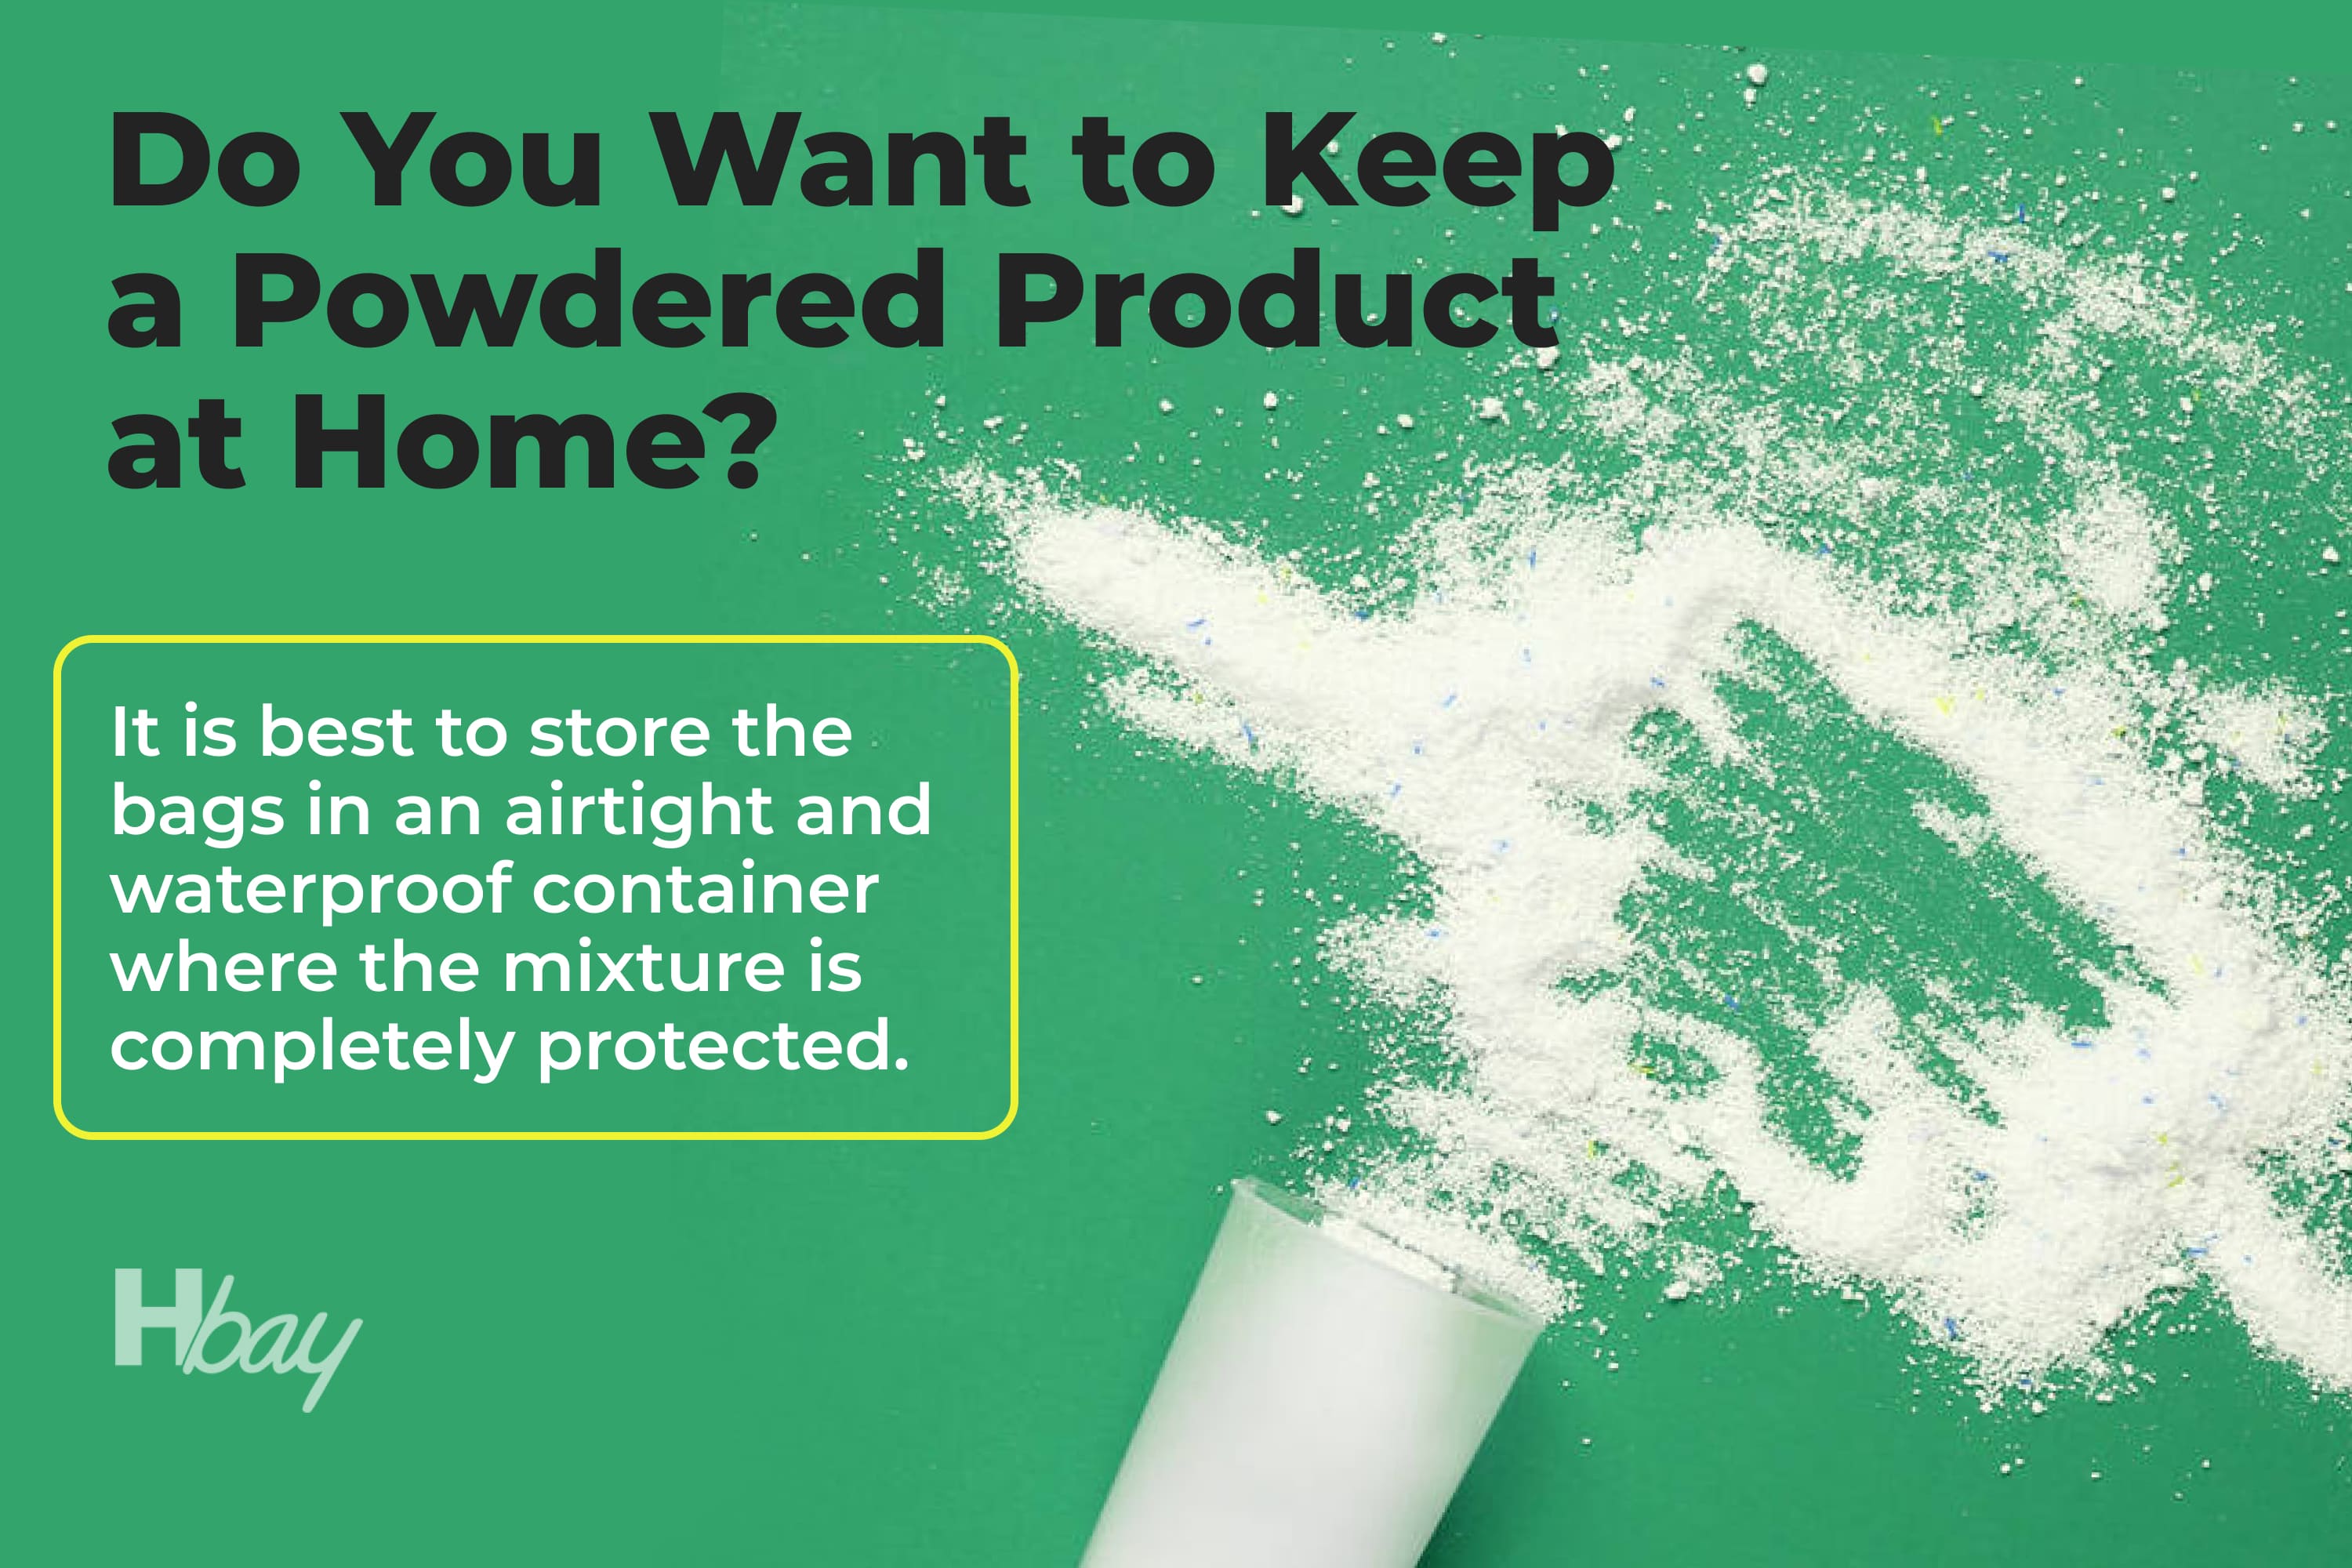 Do you want to keep a powdered product at home